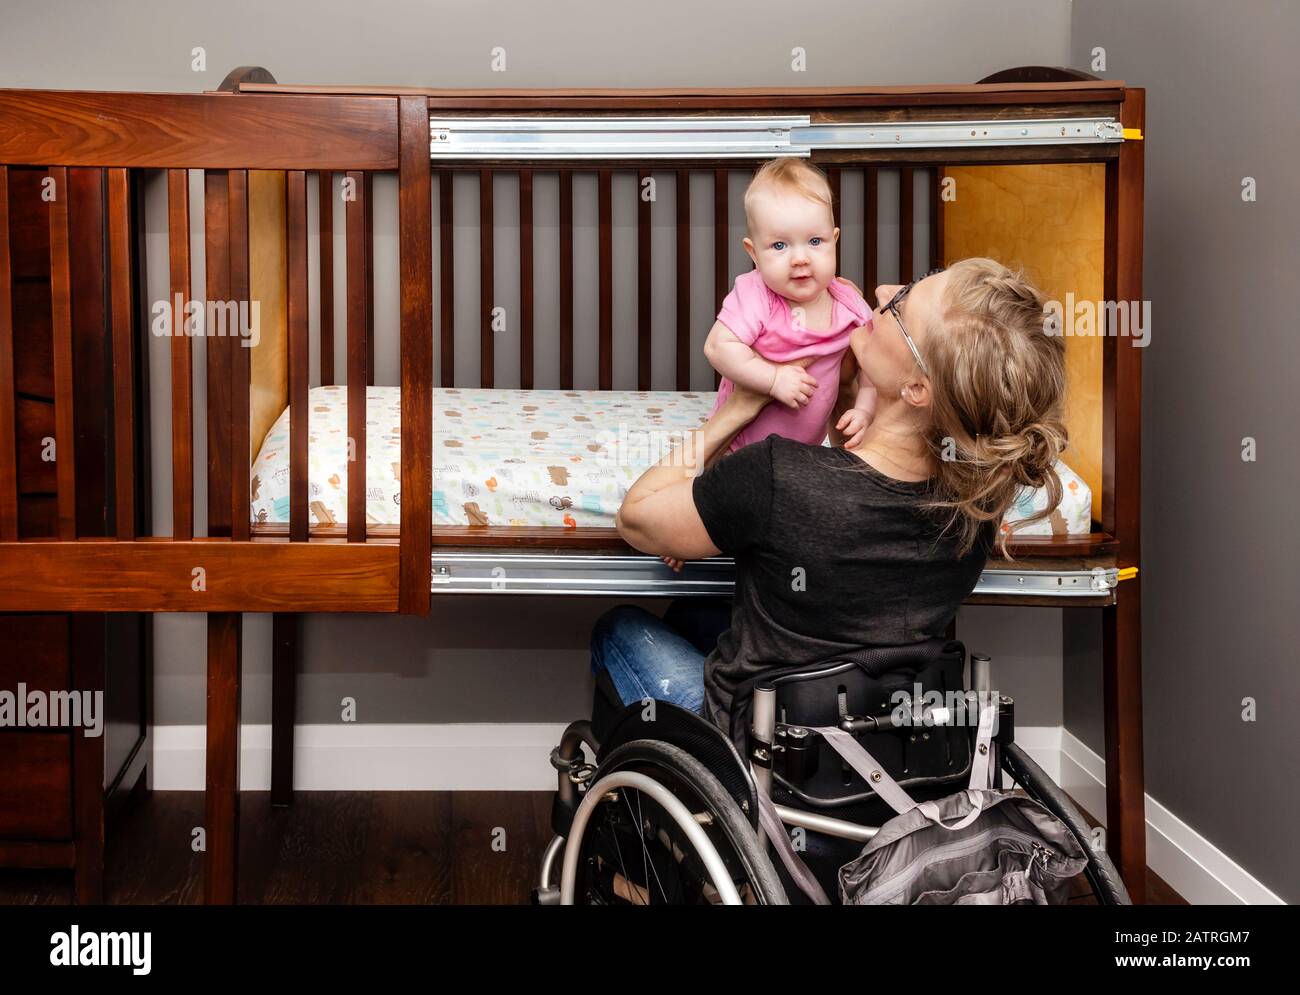 A paraplegic mother lifting a baby from a customized side-opening crib that allows her to put her baby down for a nap from her position in a wheelc... Stock Photo